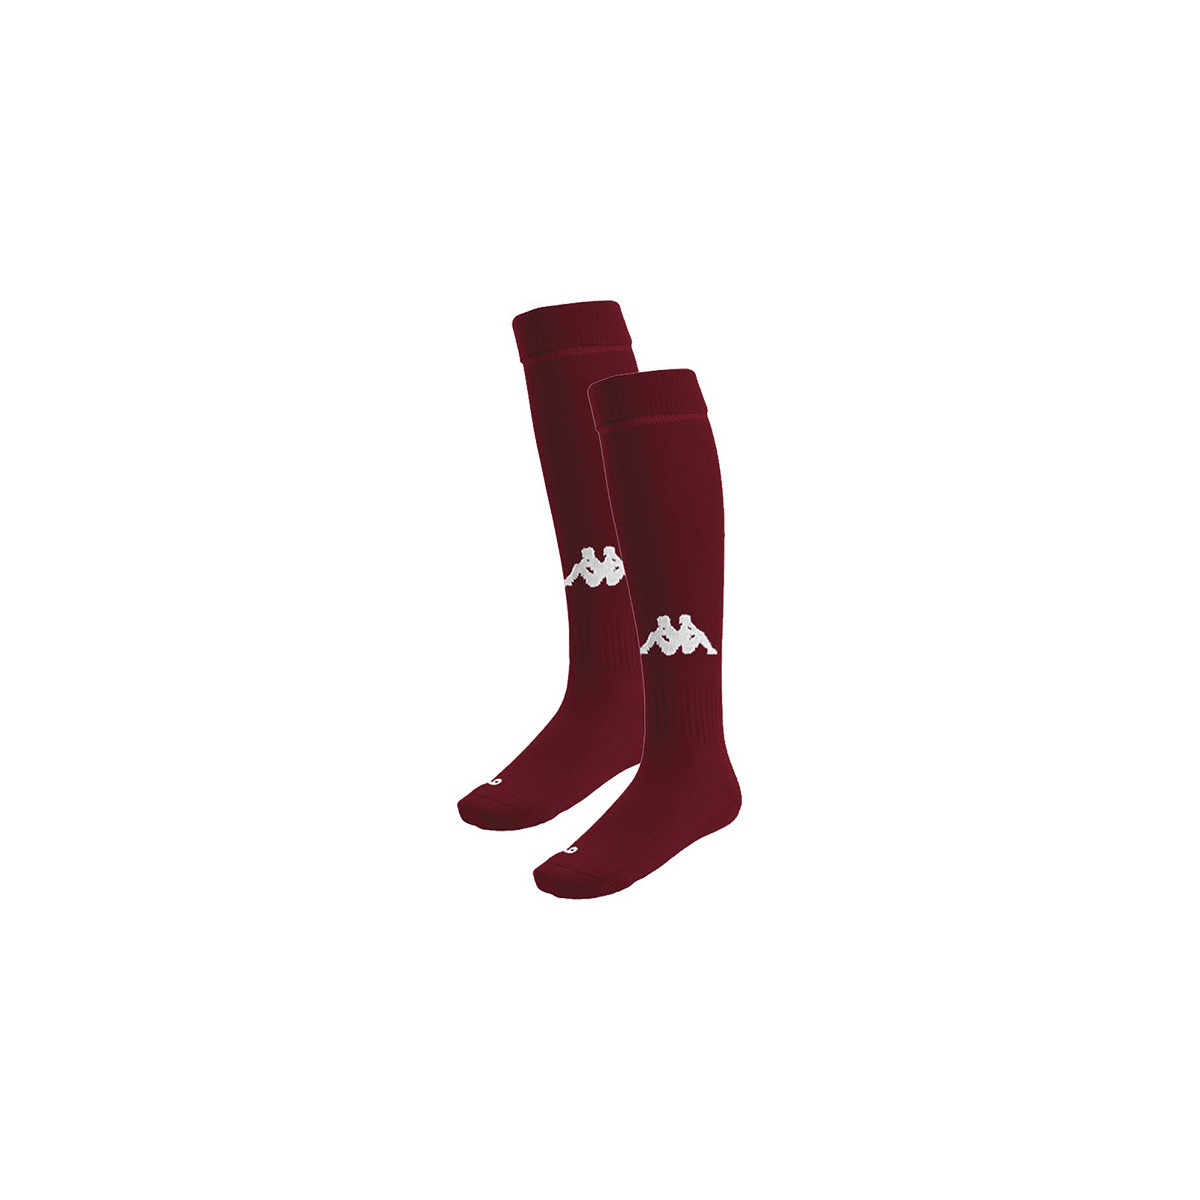 Kappa Rouge Chaussettes Penao (3 paires) iYld6tnw